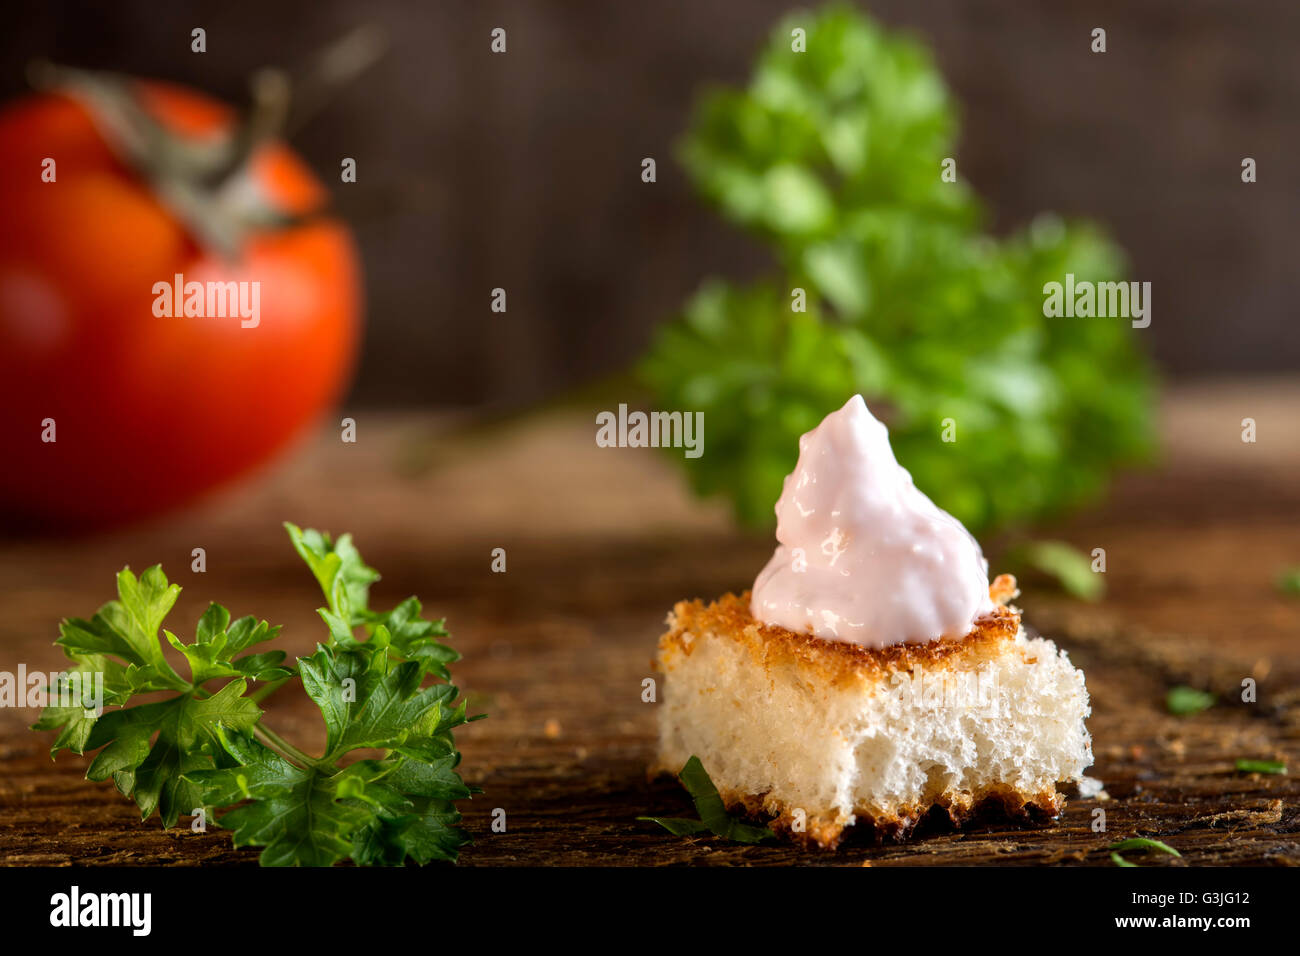 Roe salad appetizer with bread and herbs over wooden background Stock Photo